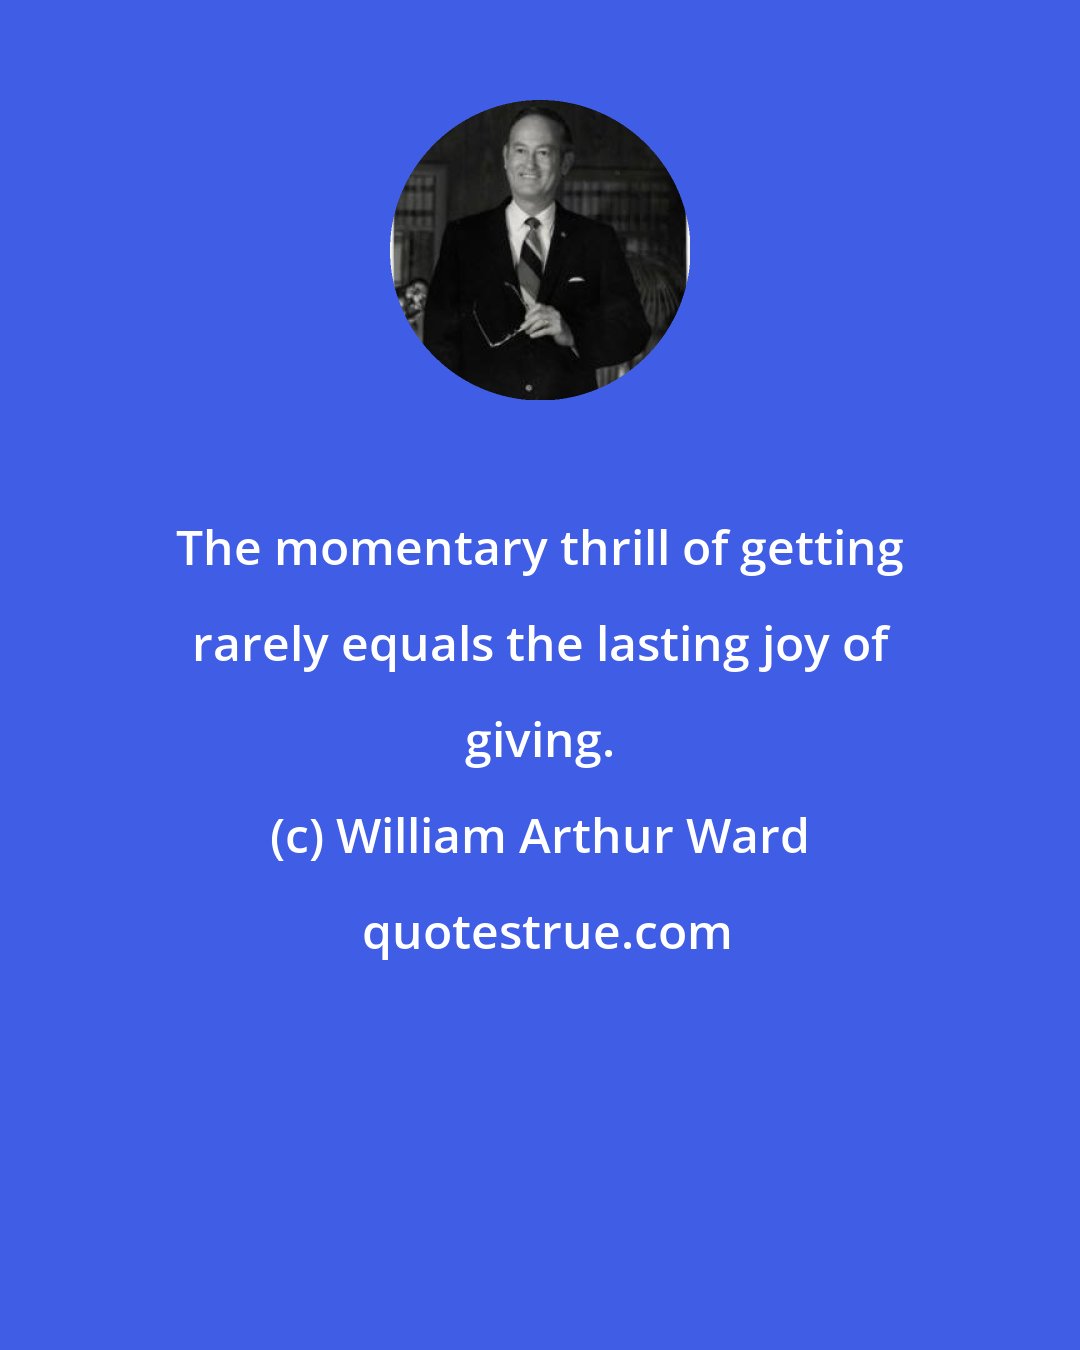 William Arthur Ward: The momentary thrill of getting rarely equals the lasting joy of giving.